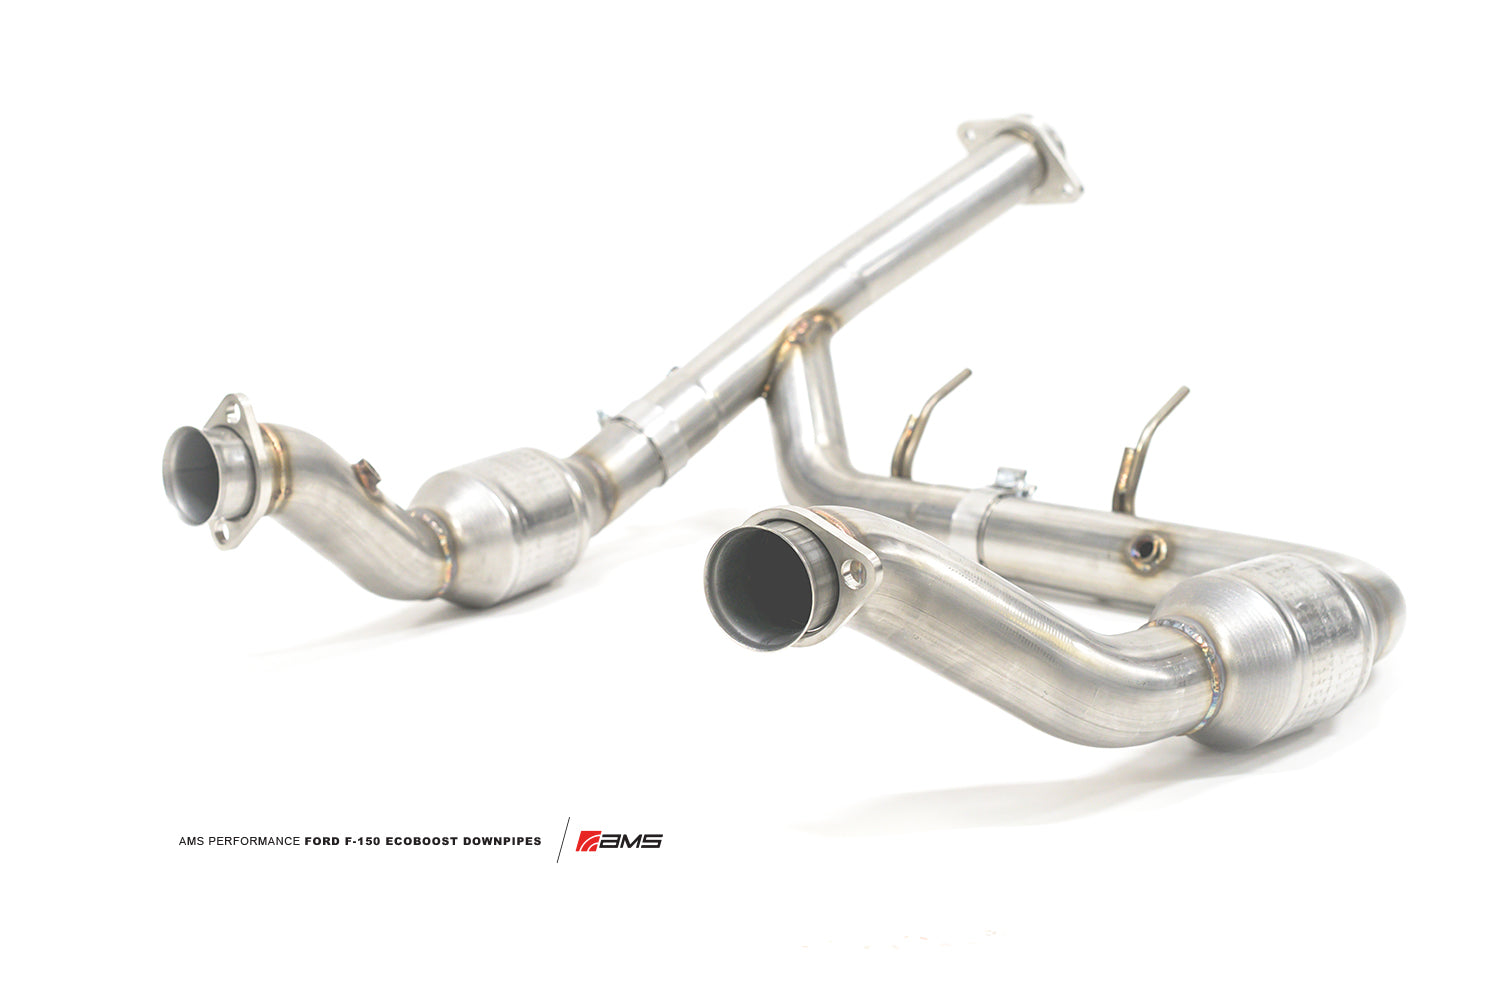 '15-20 Ford F150 3.5L Ecoboost Street Downpipes AMS display